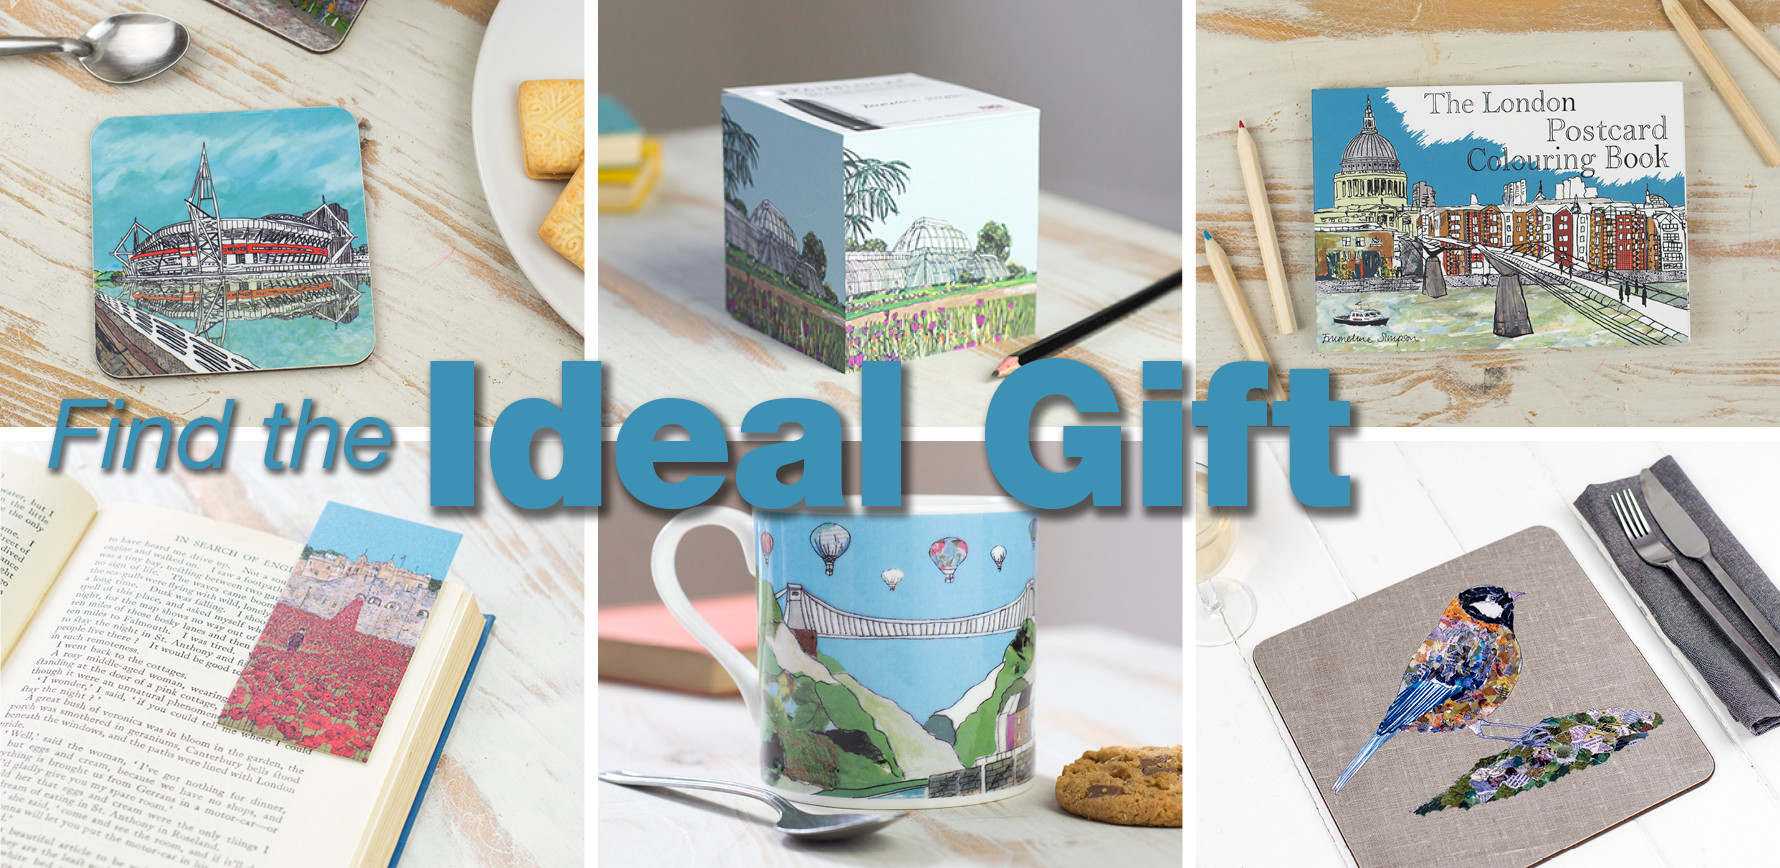 Find your ideal gift